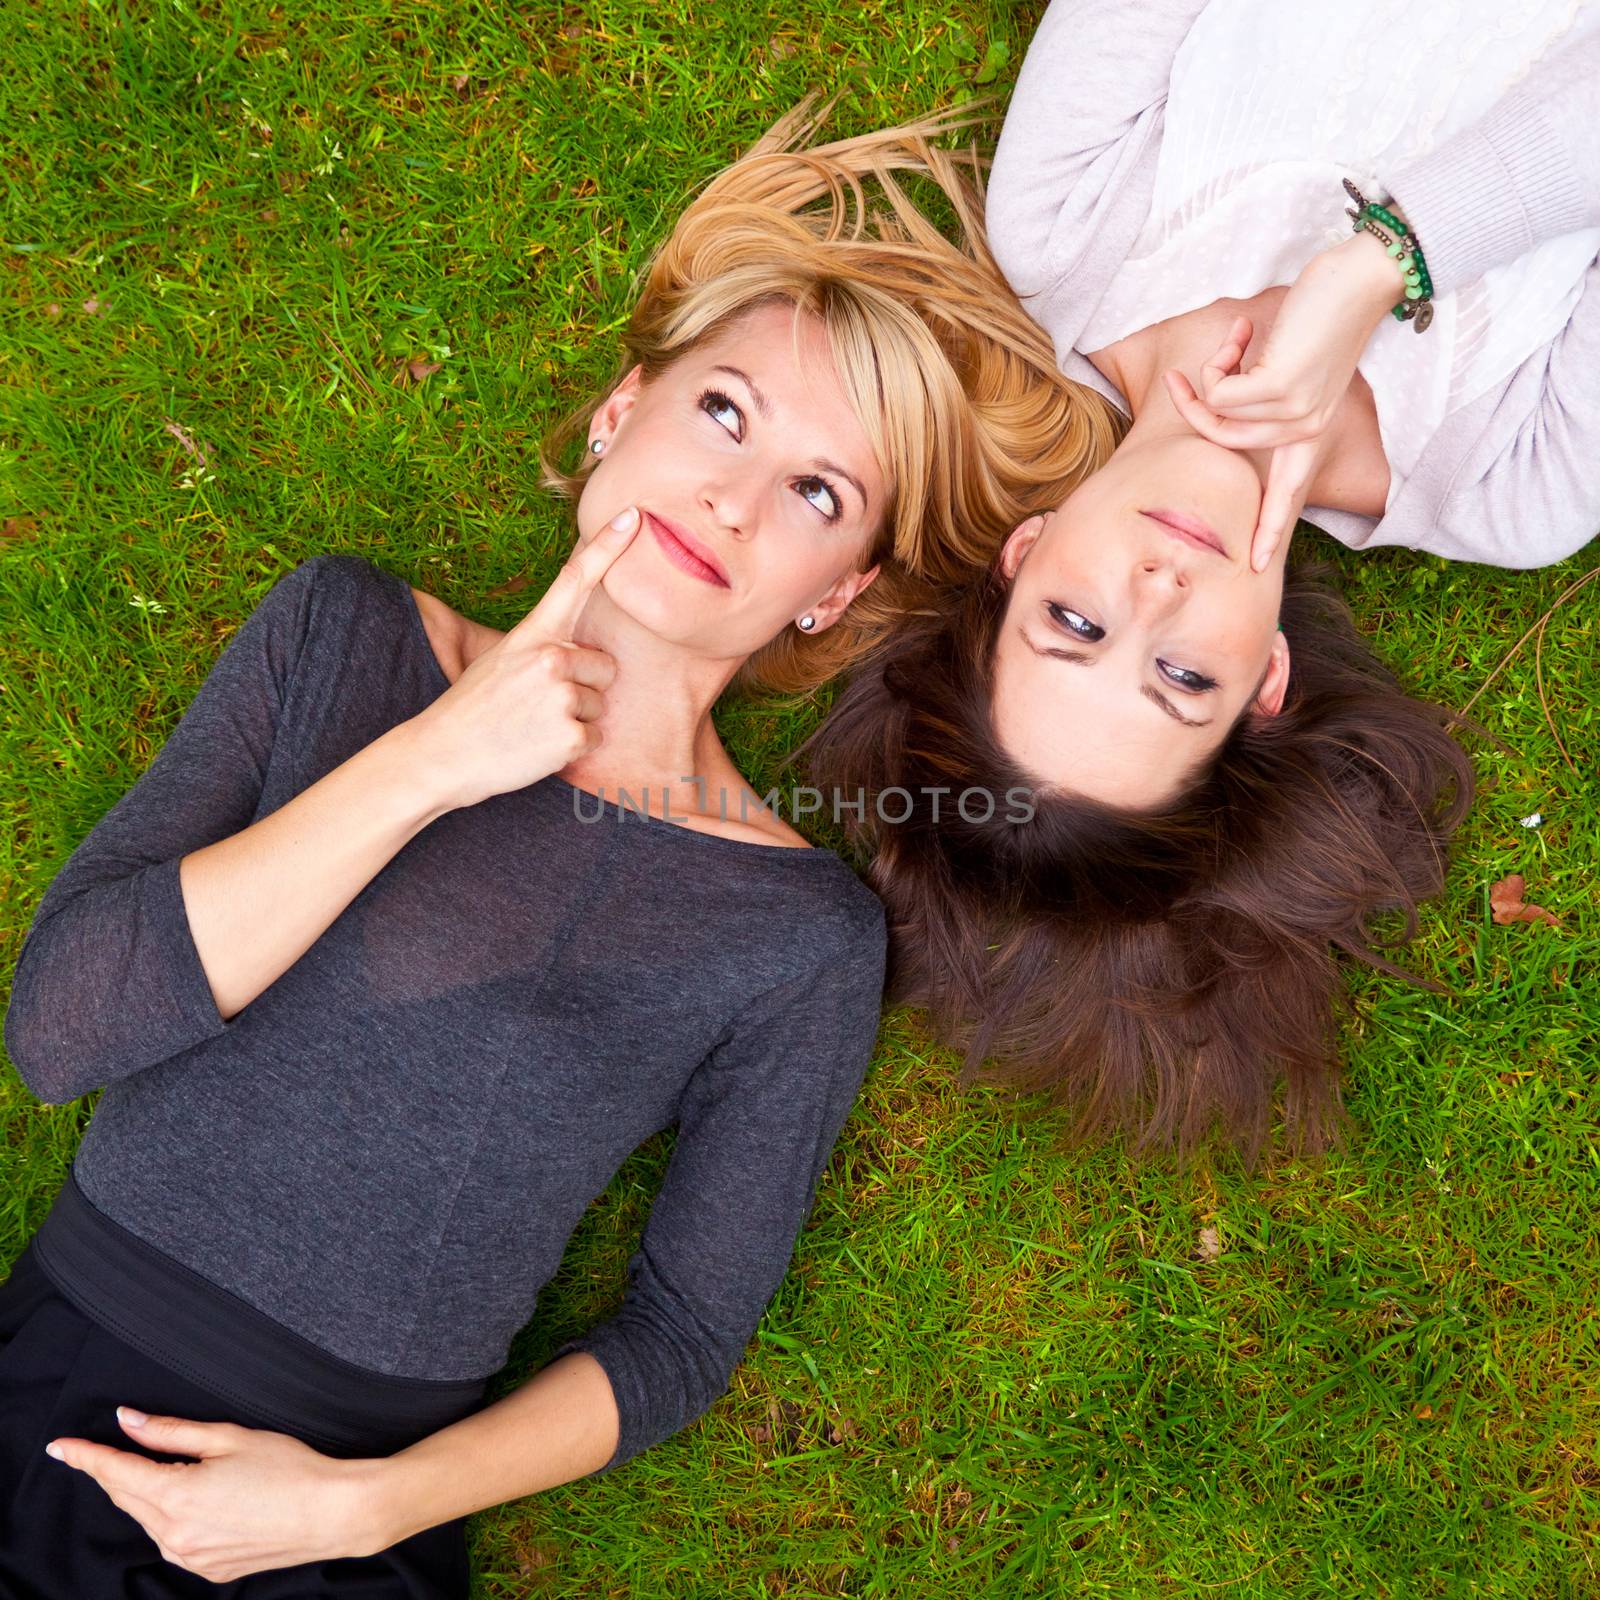 Two beautiful girls brainstorming in the grass.